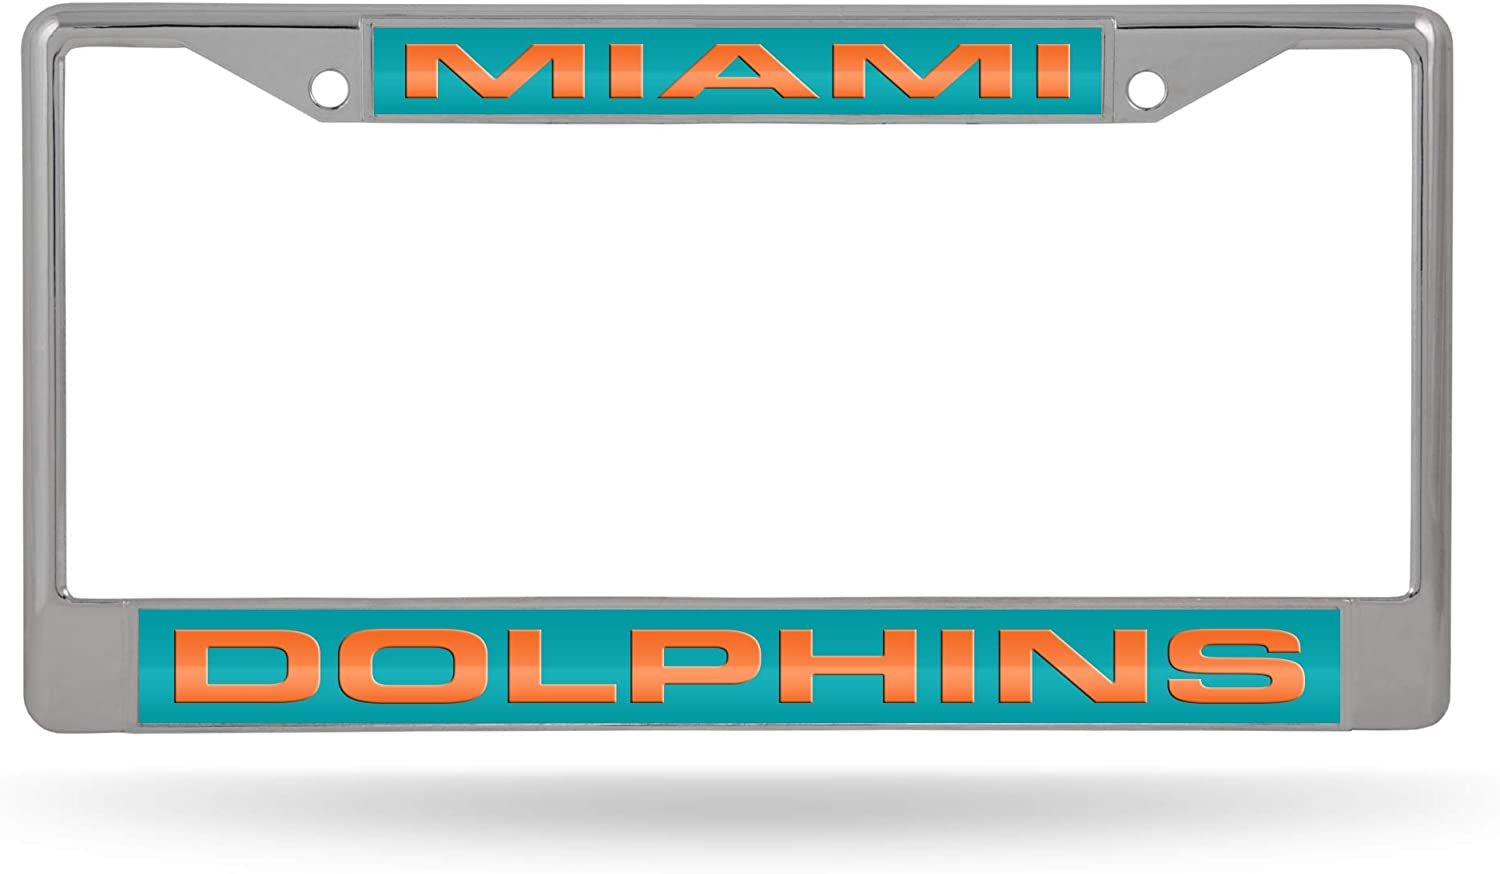 Miami Dolphins Chrome Metal License Plate Frame Tag Cover, Laser Acrylic Mirrored Inserts, 12x6 Inch